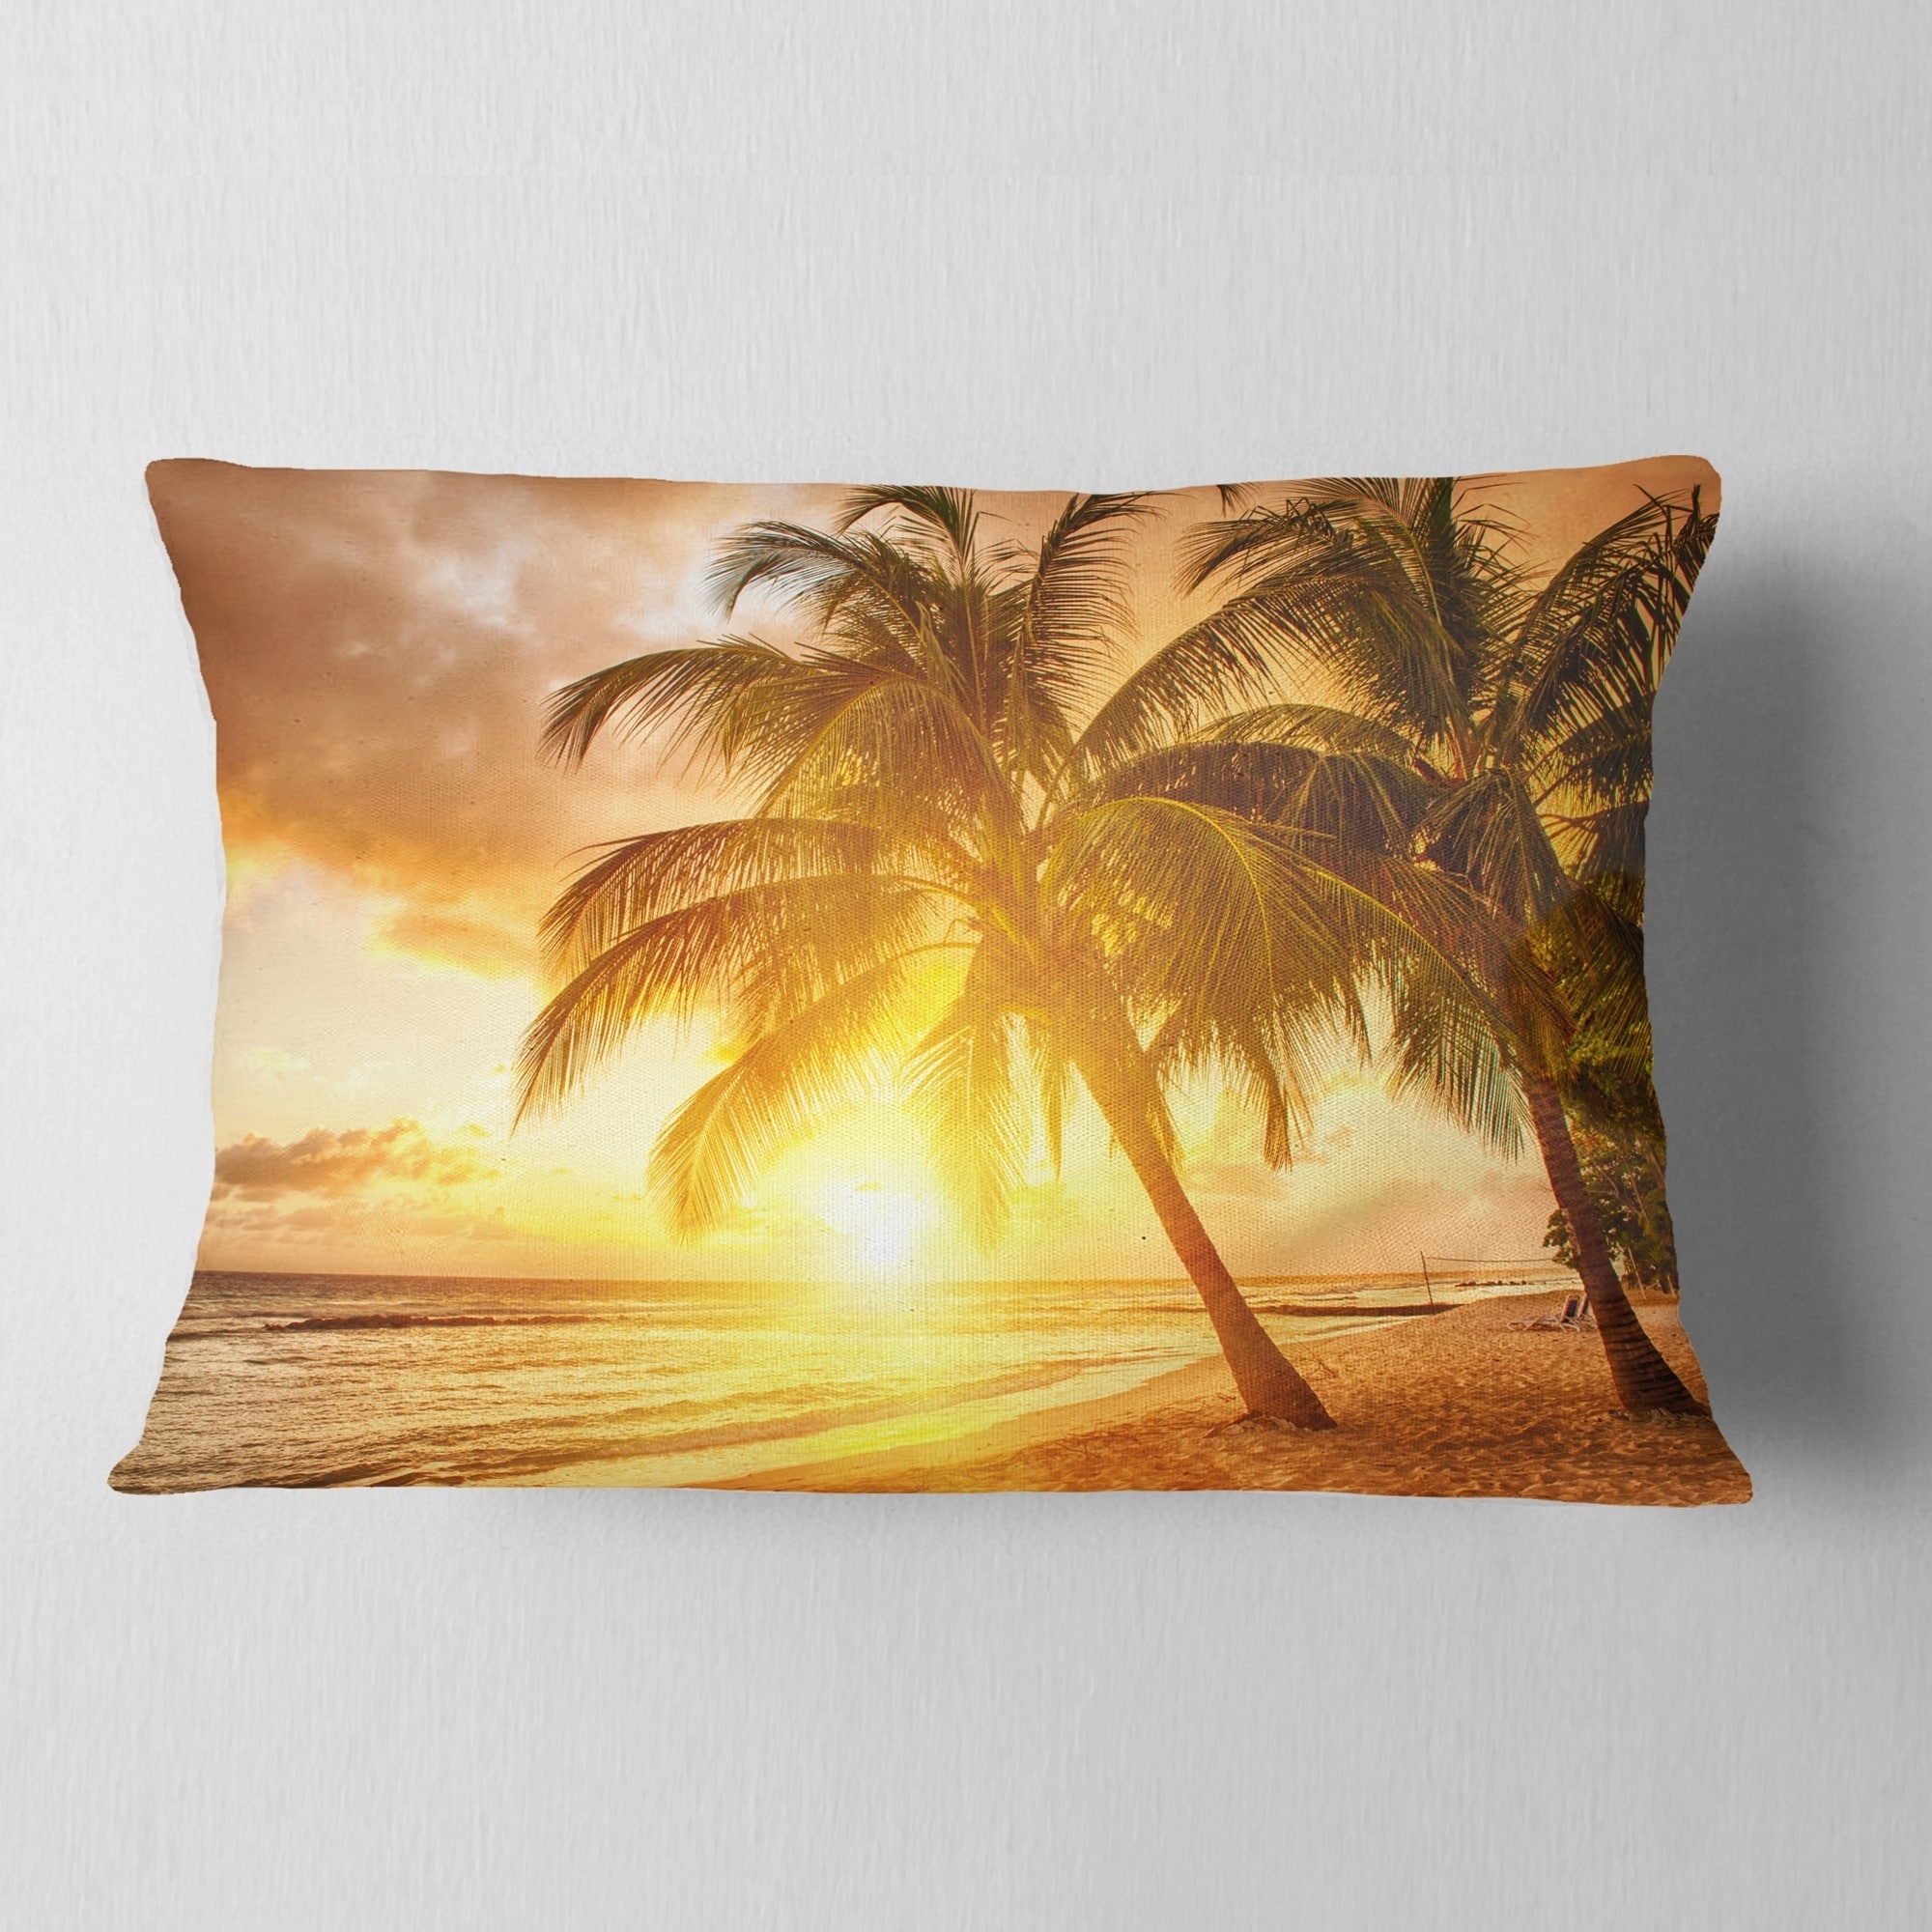 Sofa Throw Pillow 16 Insert Printed On Both Side Designart CU11449-16-16-C Waters and Blue Sky Sunset Modern Seascape Round Cushion Cover for Living Room 